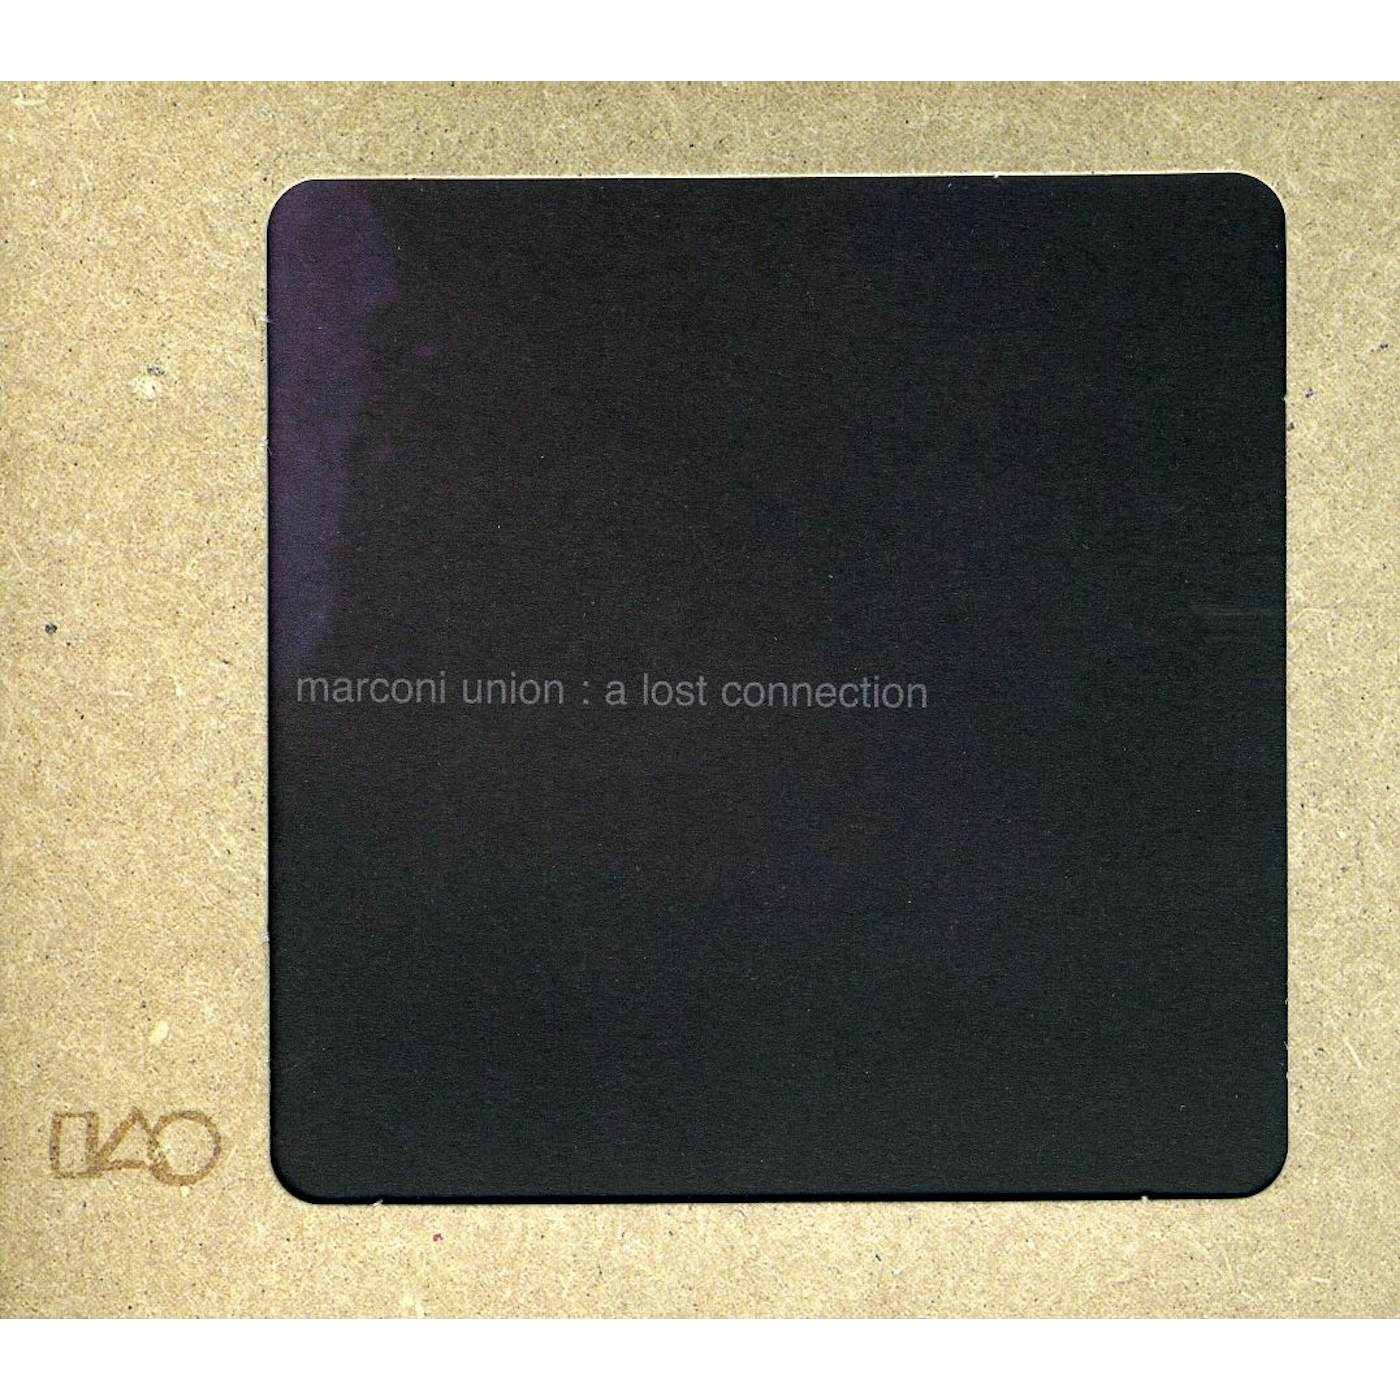 Marconi Union LOST CONNECTION CD